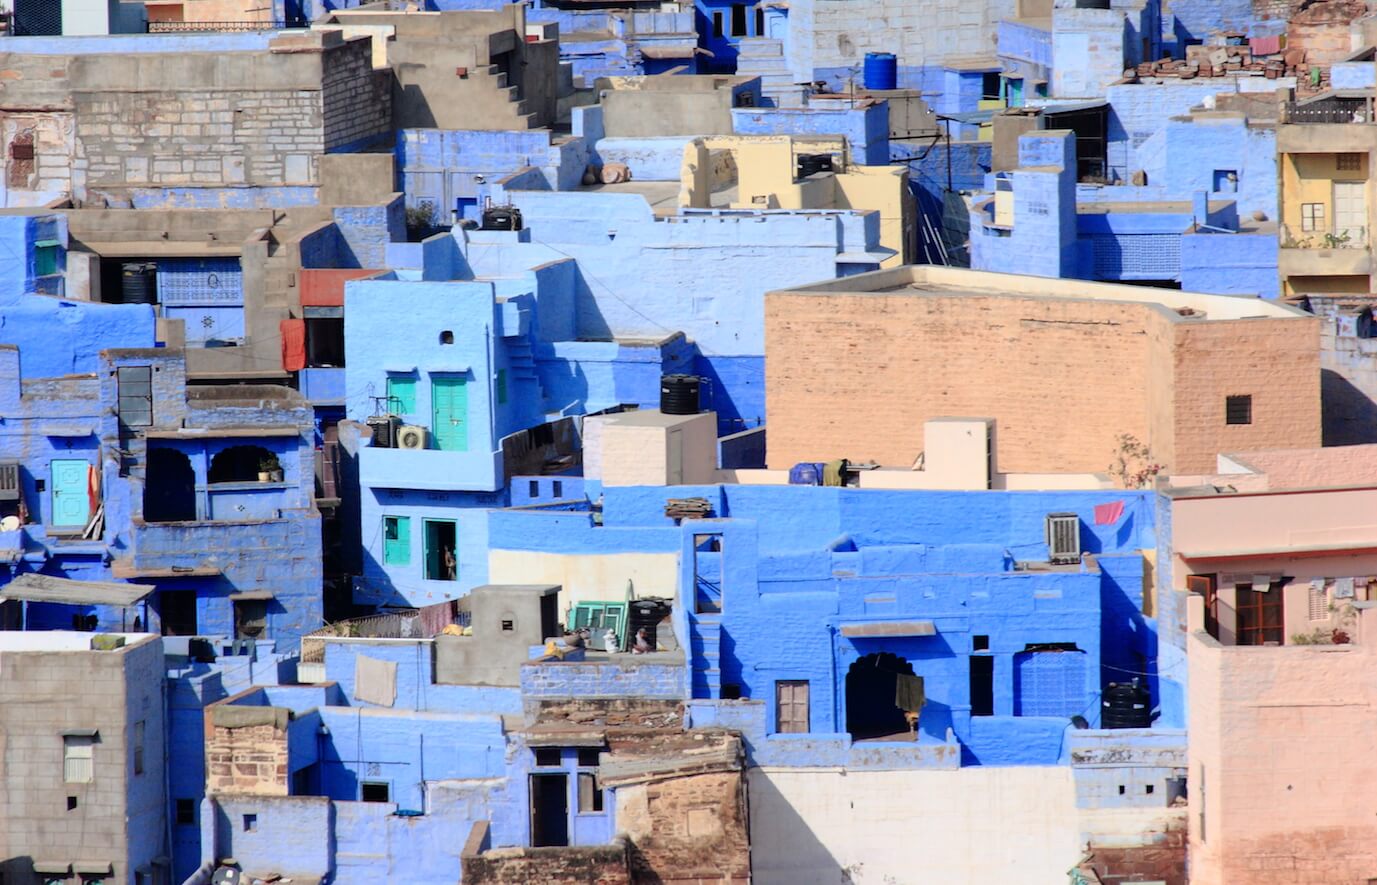 Aerial view of Jodhpur. Photo by Strudelt via Flickr Commons.